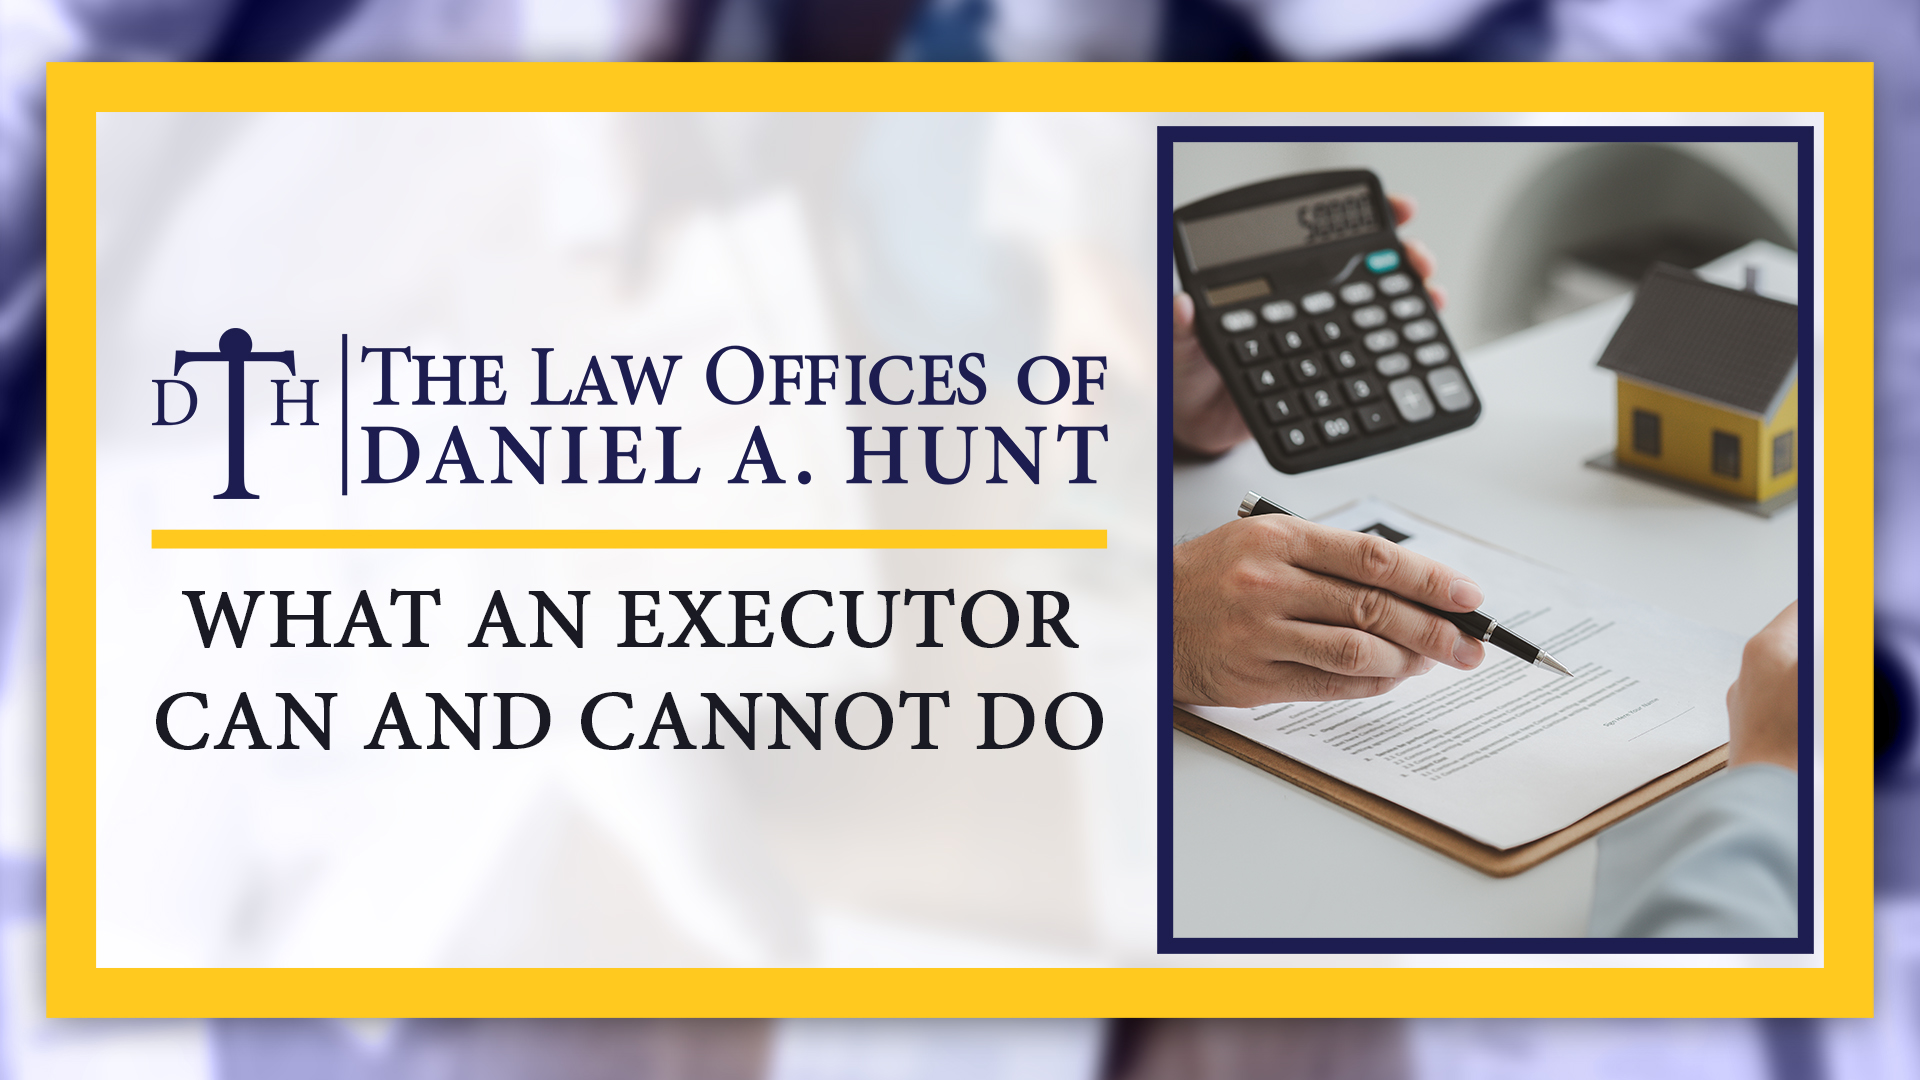 What an Executor Can and Cannot Do